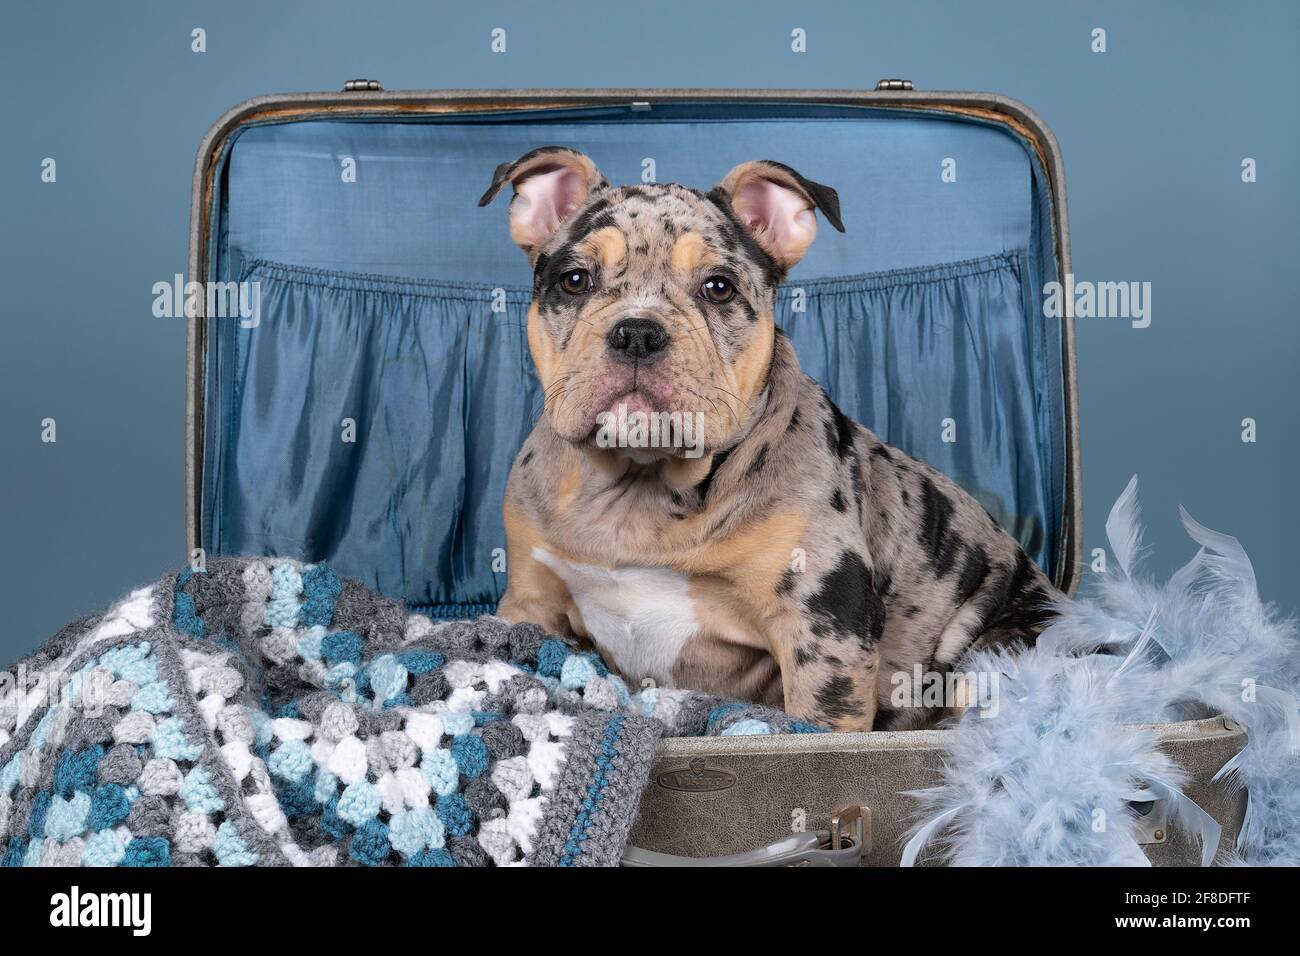 A Portrait of a cute old english bulldog puppy in a suitcase with a plaid on a blue background Stock Photo